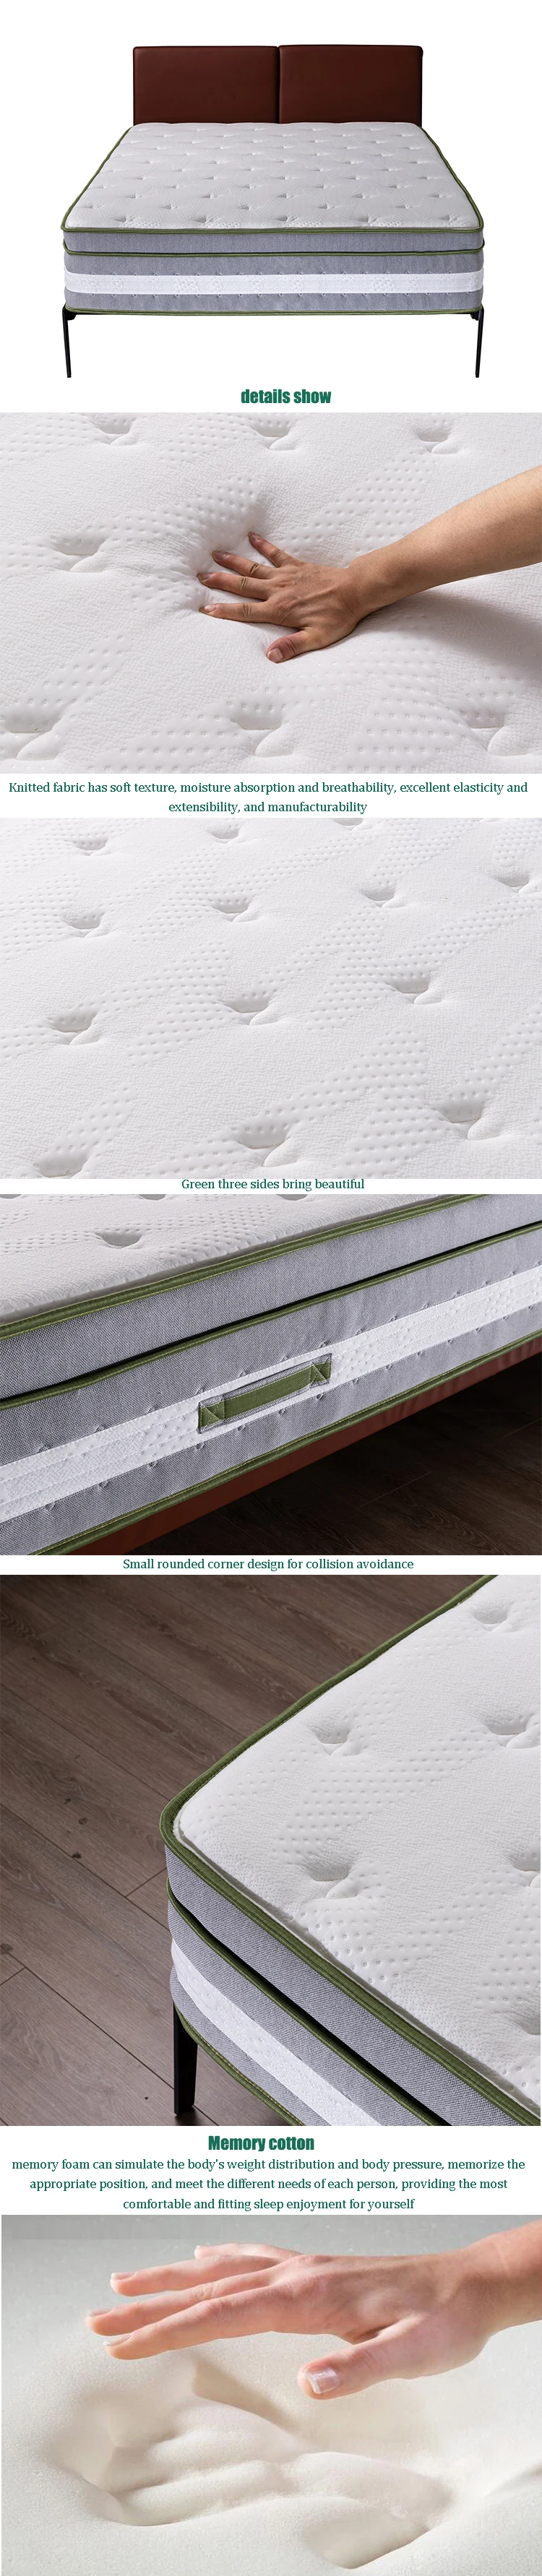 Best Price King Full Size Mattress Memory Foam Mattress Roll Up In a Box for Bed Set